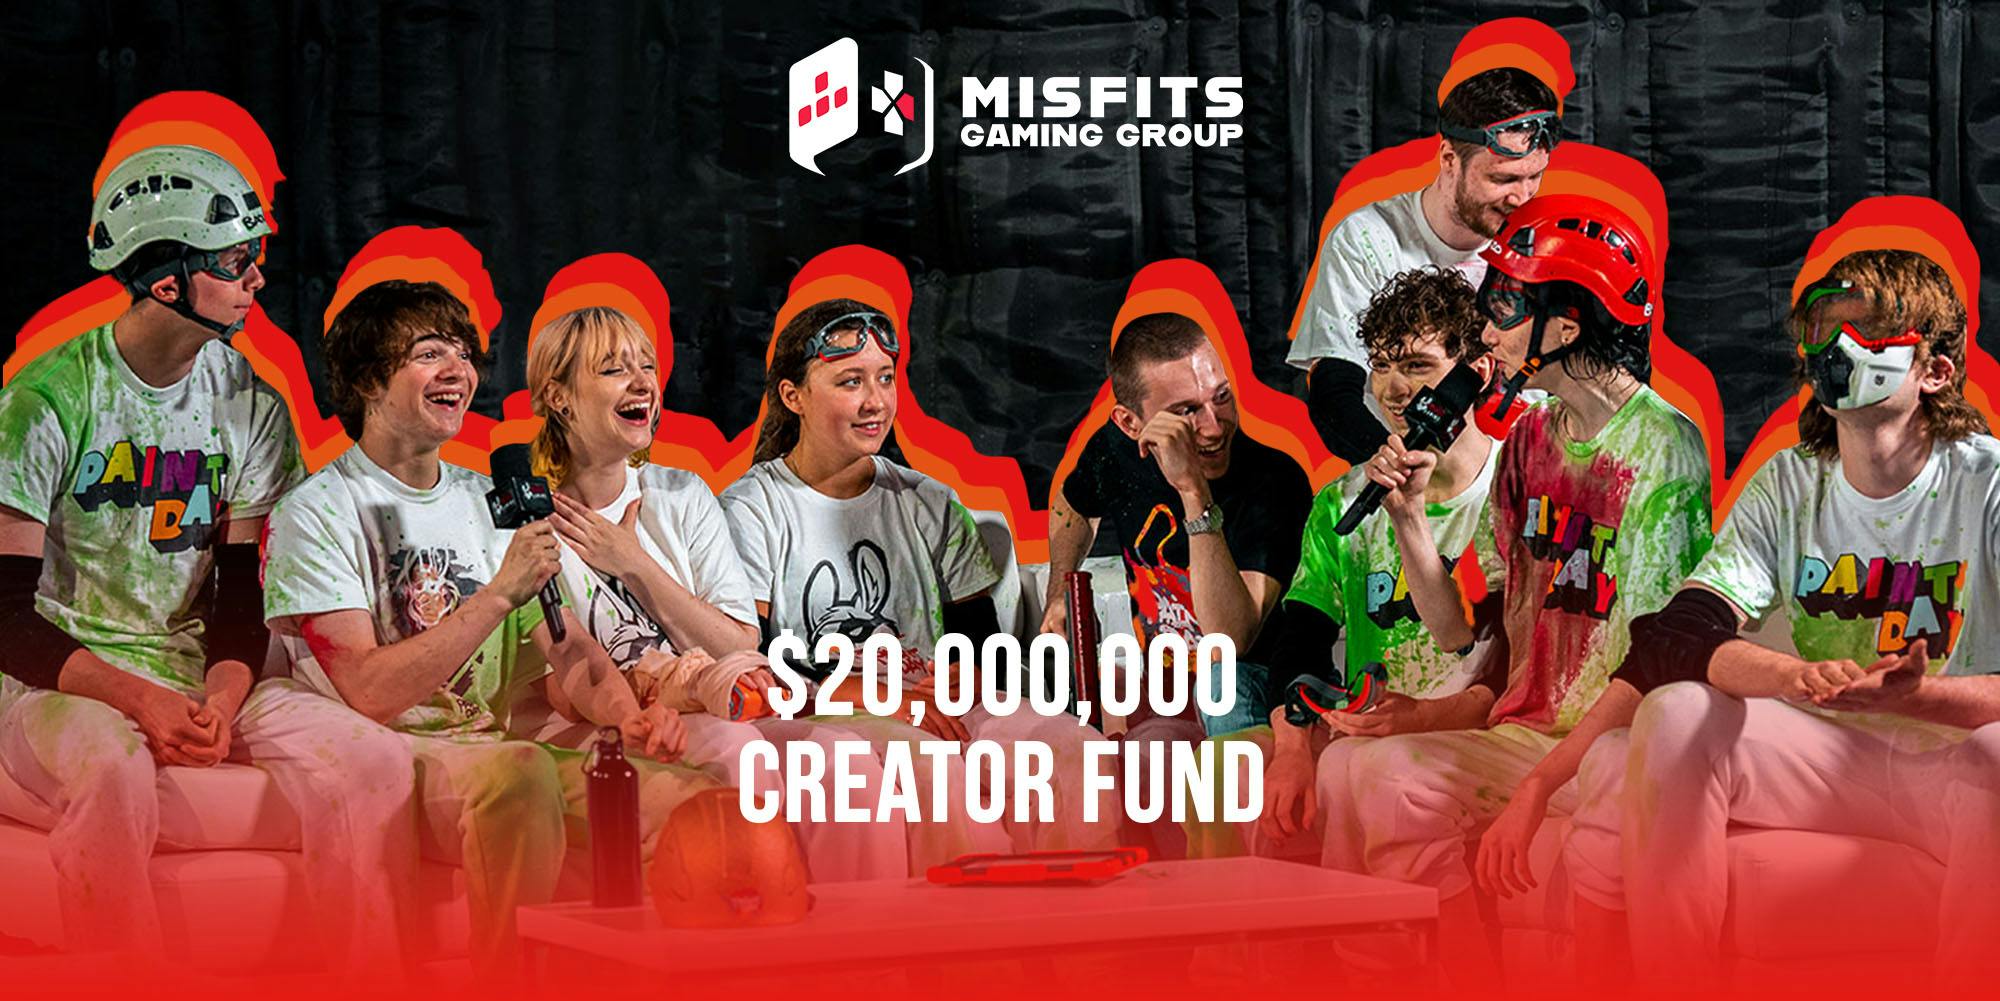 Misfits gaming group speaking on couch with red gradient bottom to top with captions "MISFITS GAMING GROUP" "$20,000,000 CREATOR FUND" Passionfruit Remix